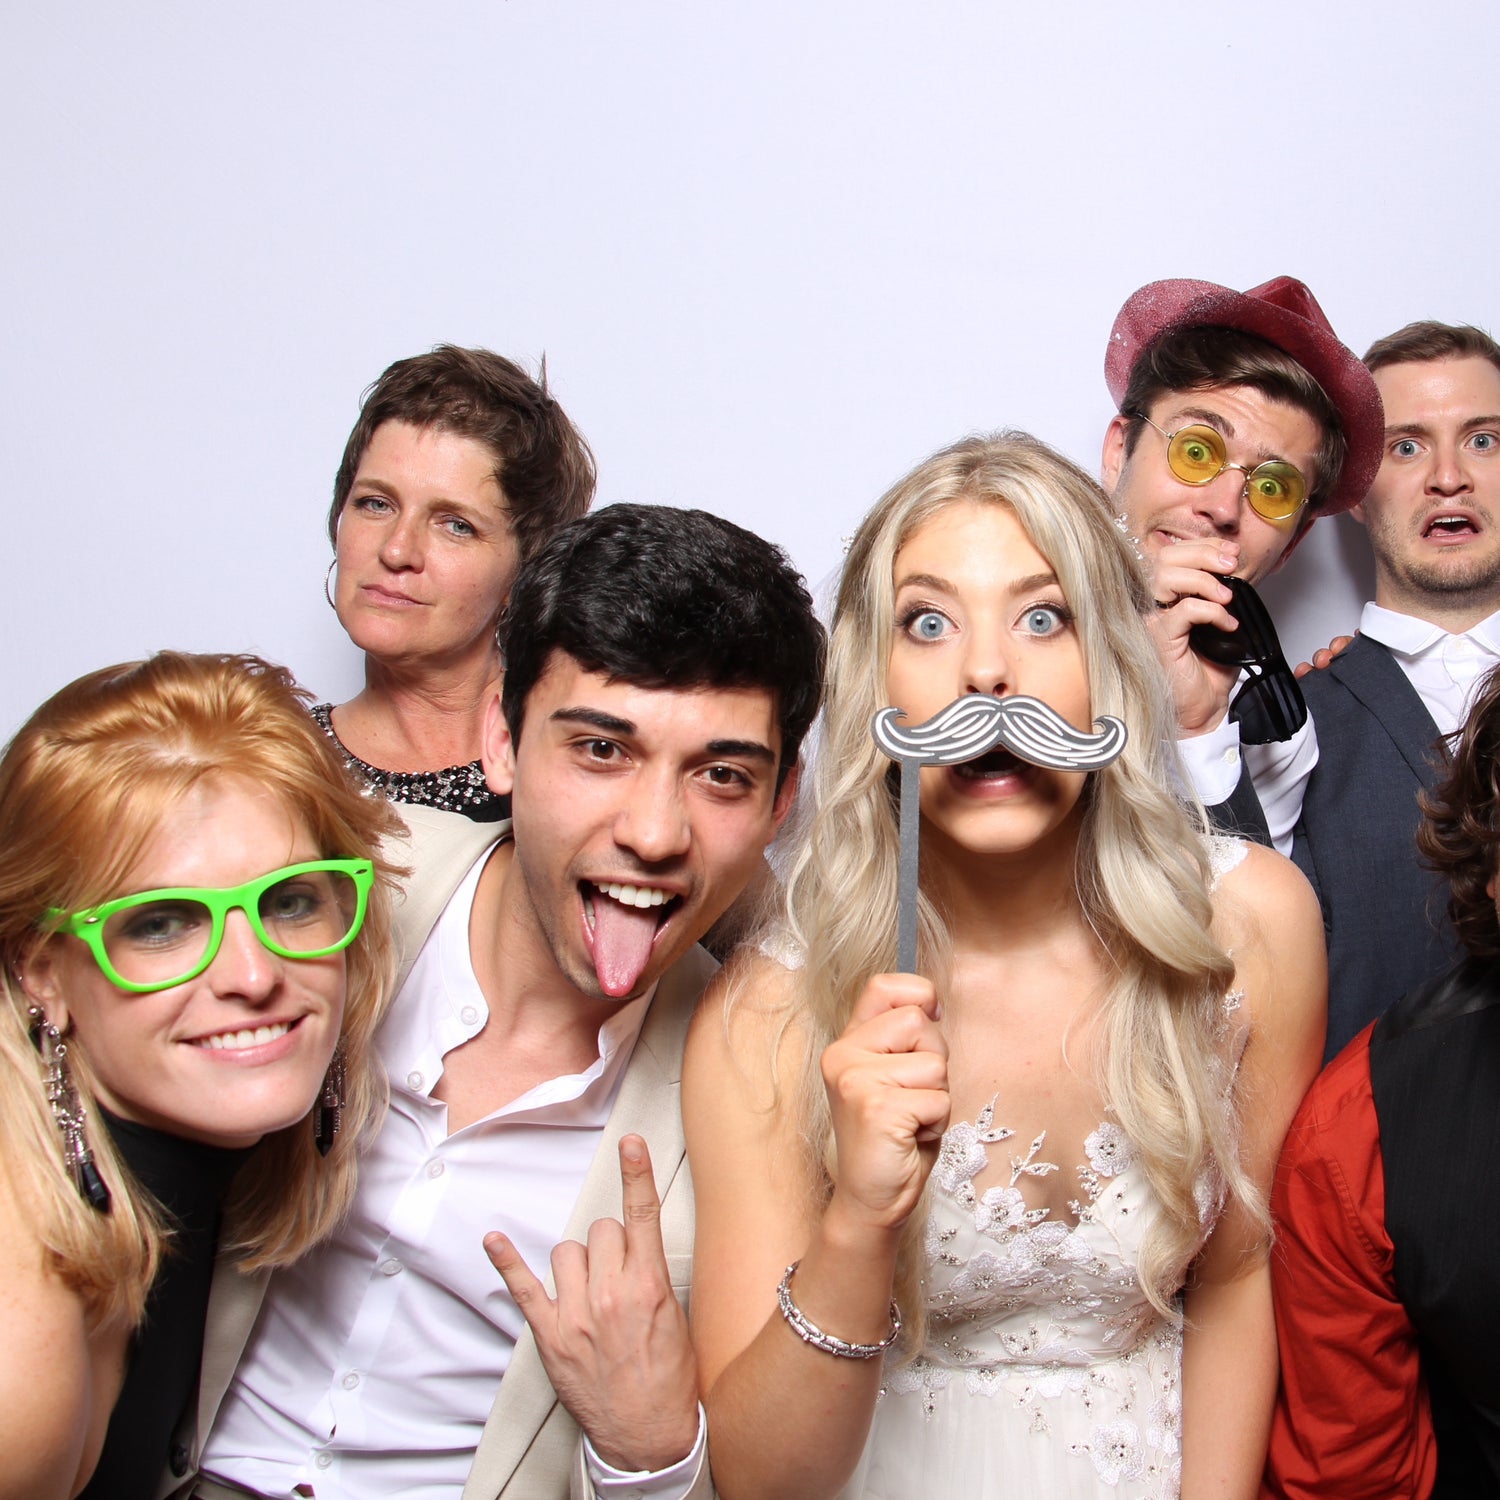 A bride and her friends pose in a wedding photo booth with silly props